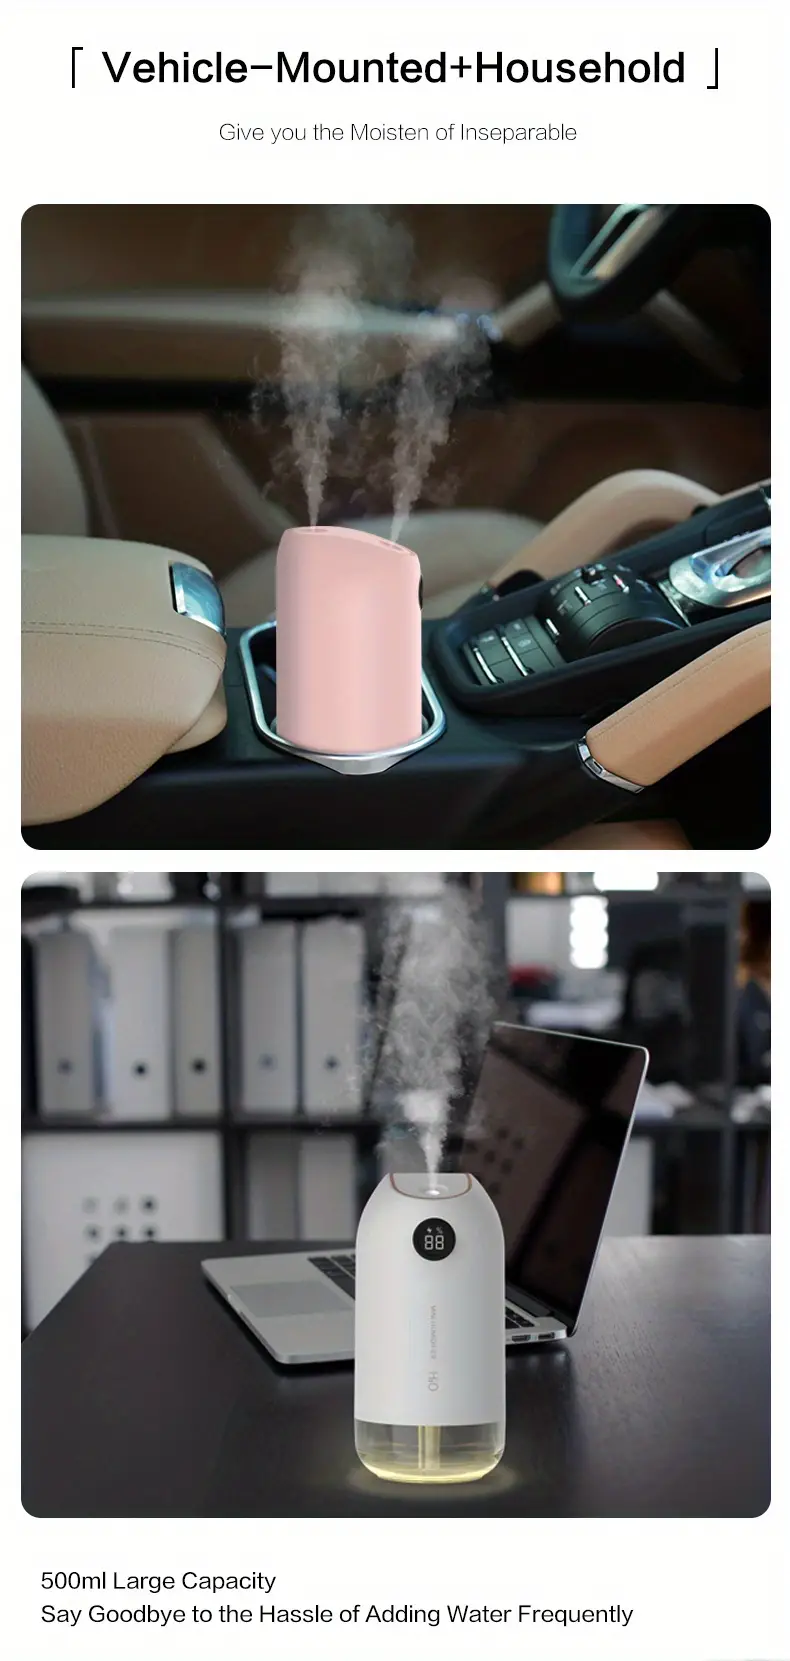 portable mini humidifier 500ml small humidifier type c personal desktop humidifier for baby bedroom travel office car household water shortage protection 2 spray modes super quiet night light white details 3